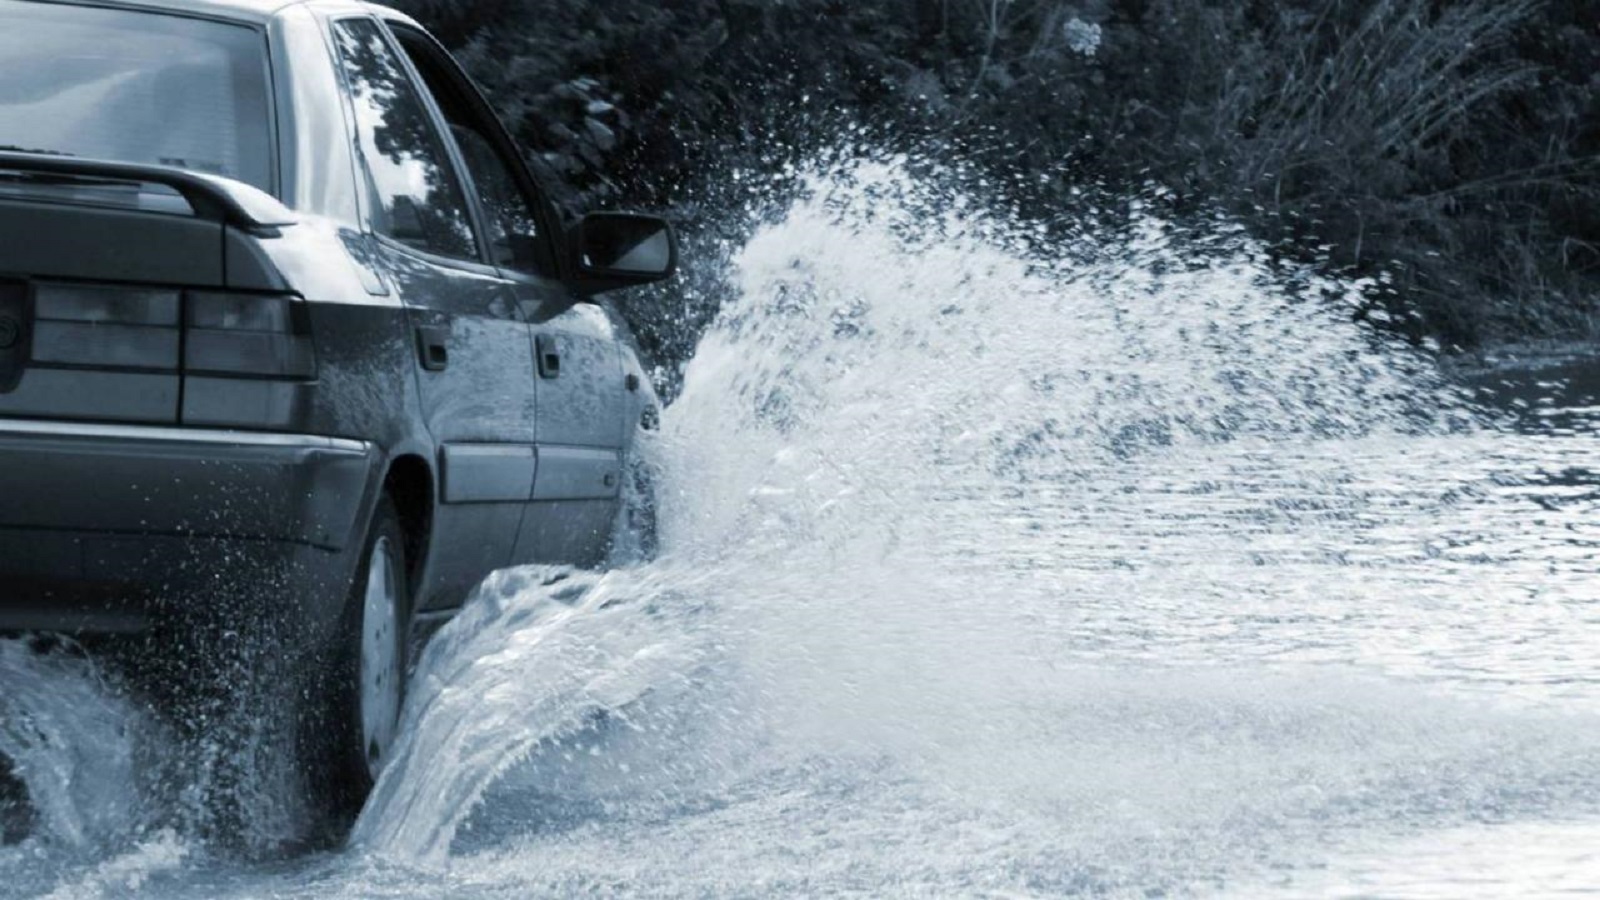 Safe driving skills through flooded areas - Photo 2.